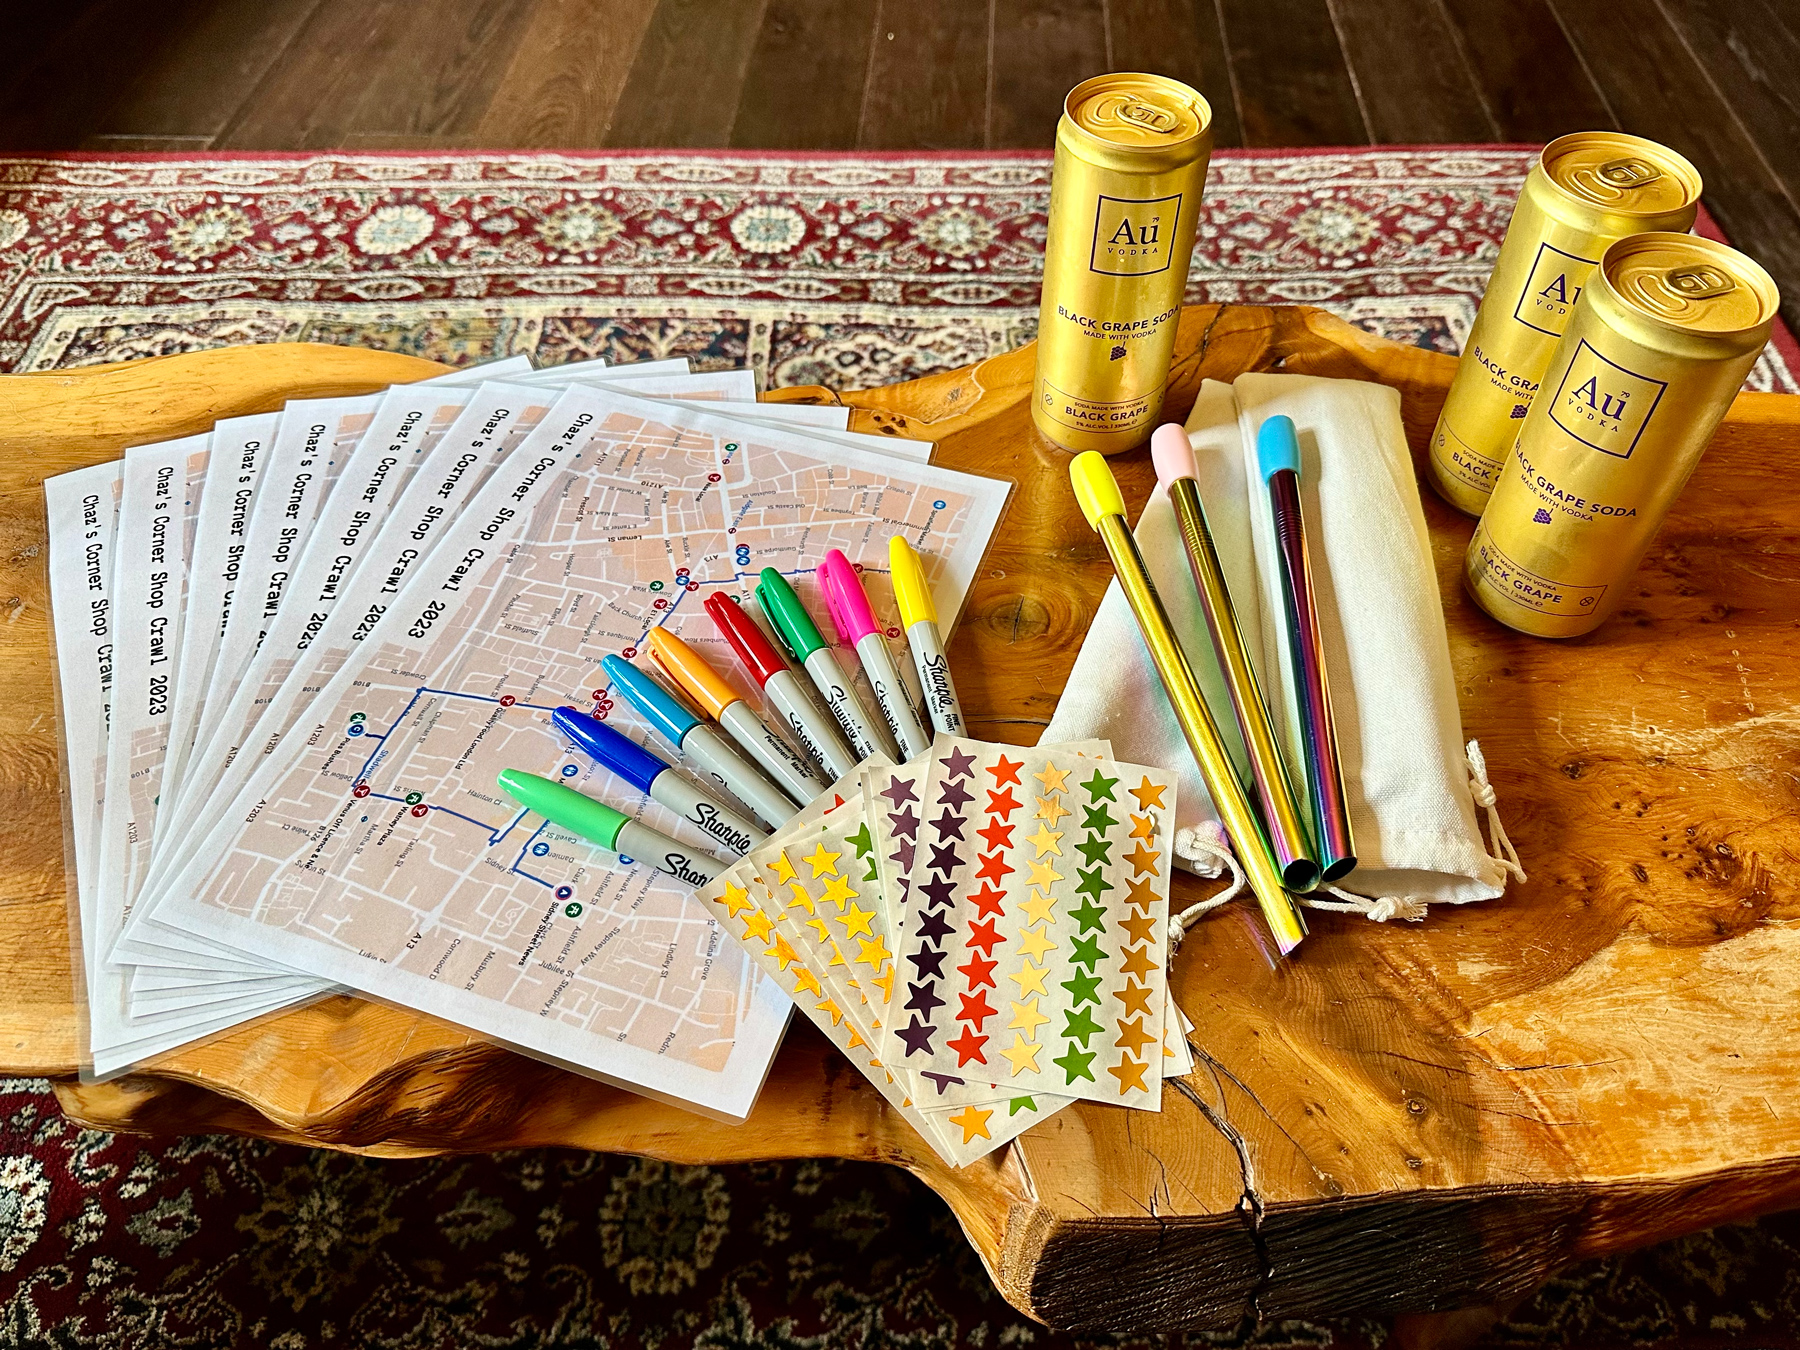 A selection of maps, Sharpies, star stickers, reusable straws, and cans of AU Black Grape Soda laid out on a table ready for our corner shop crawl